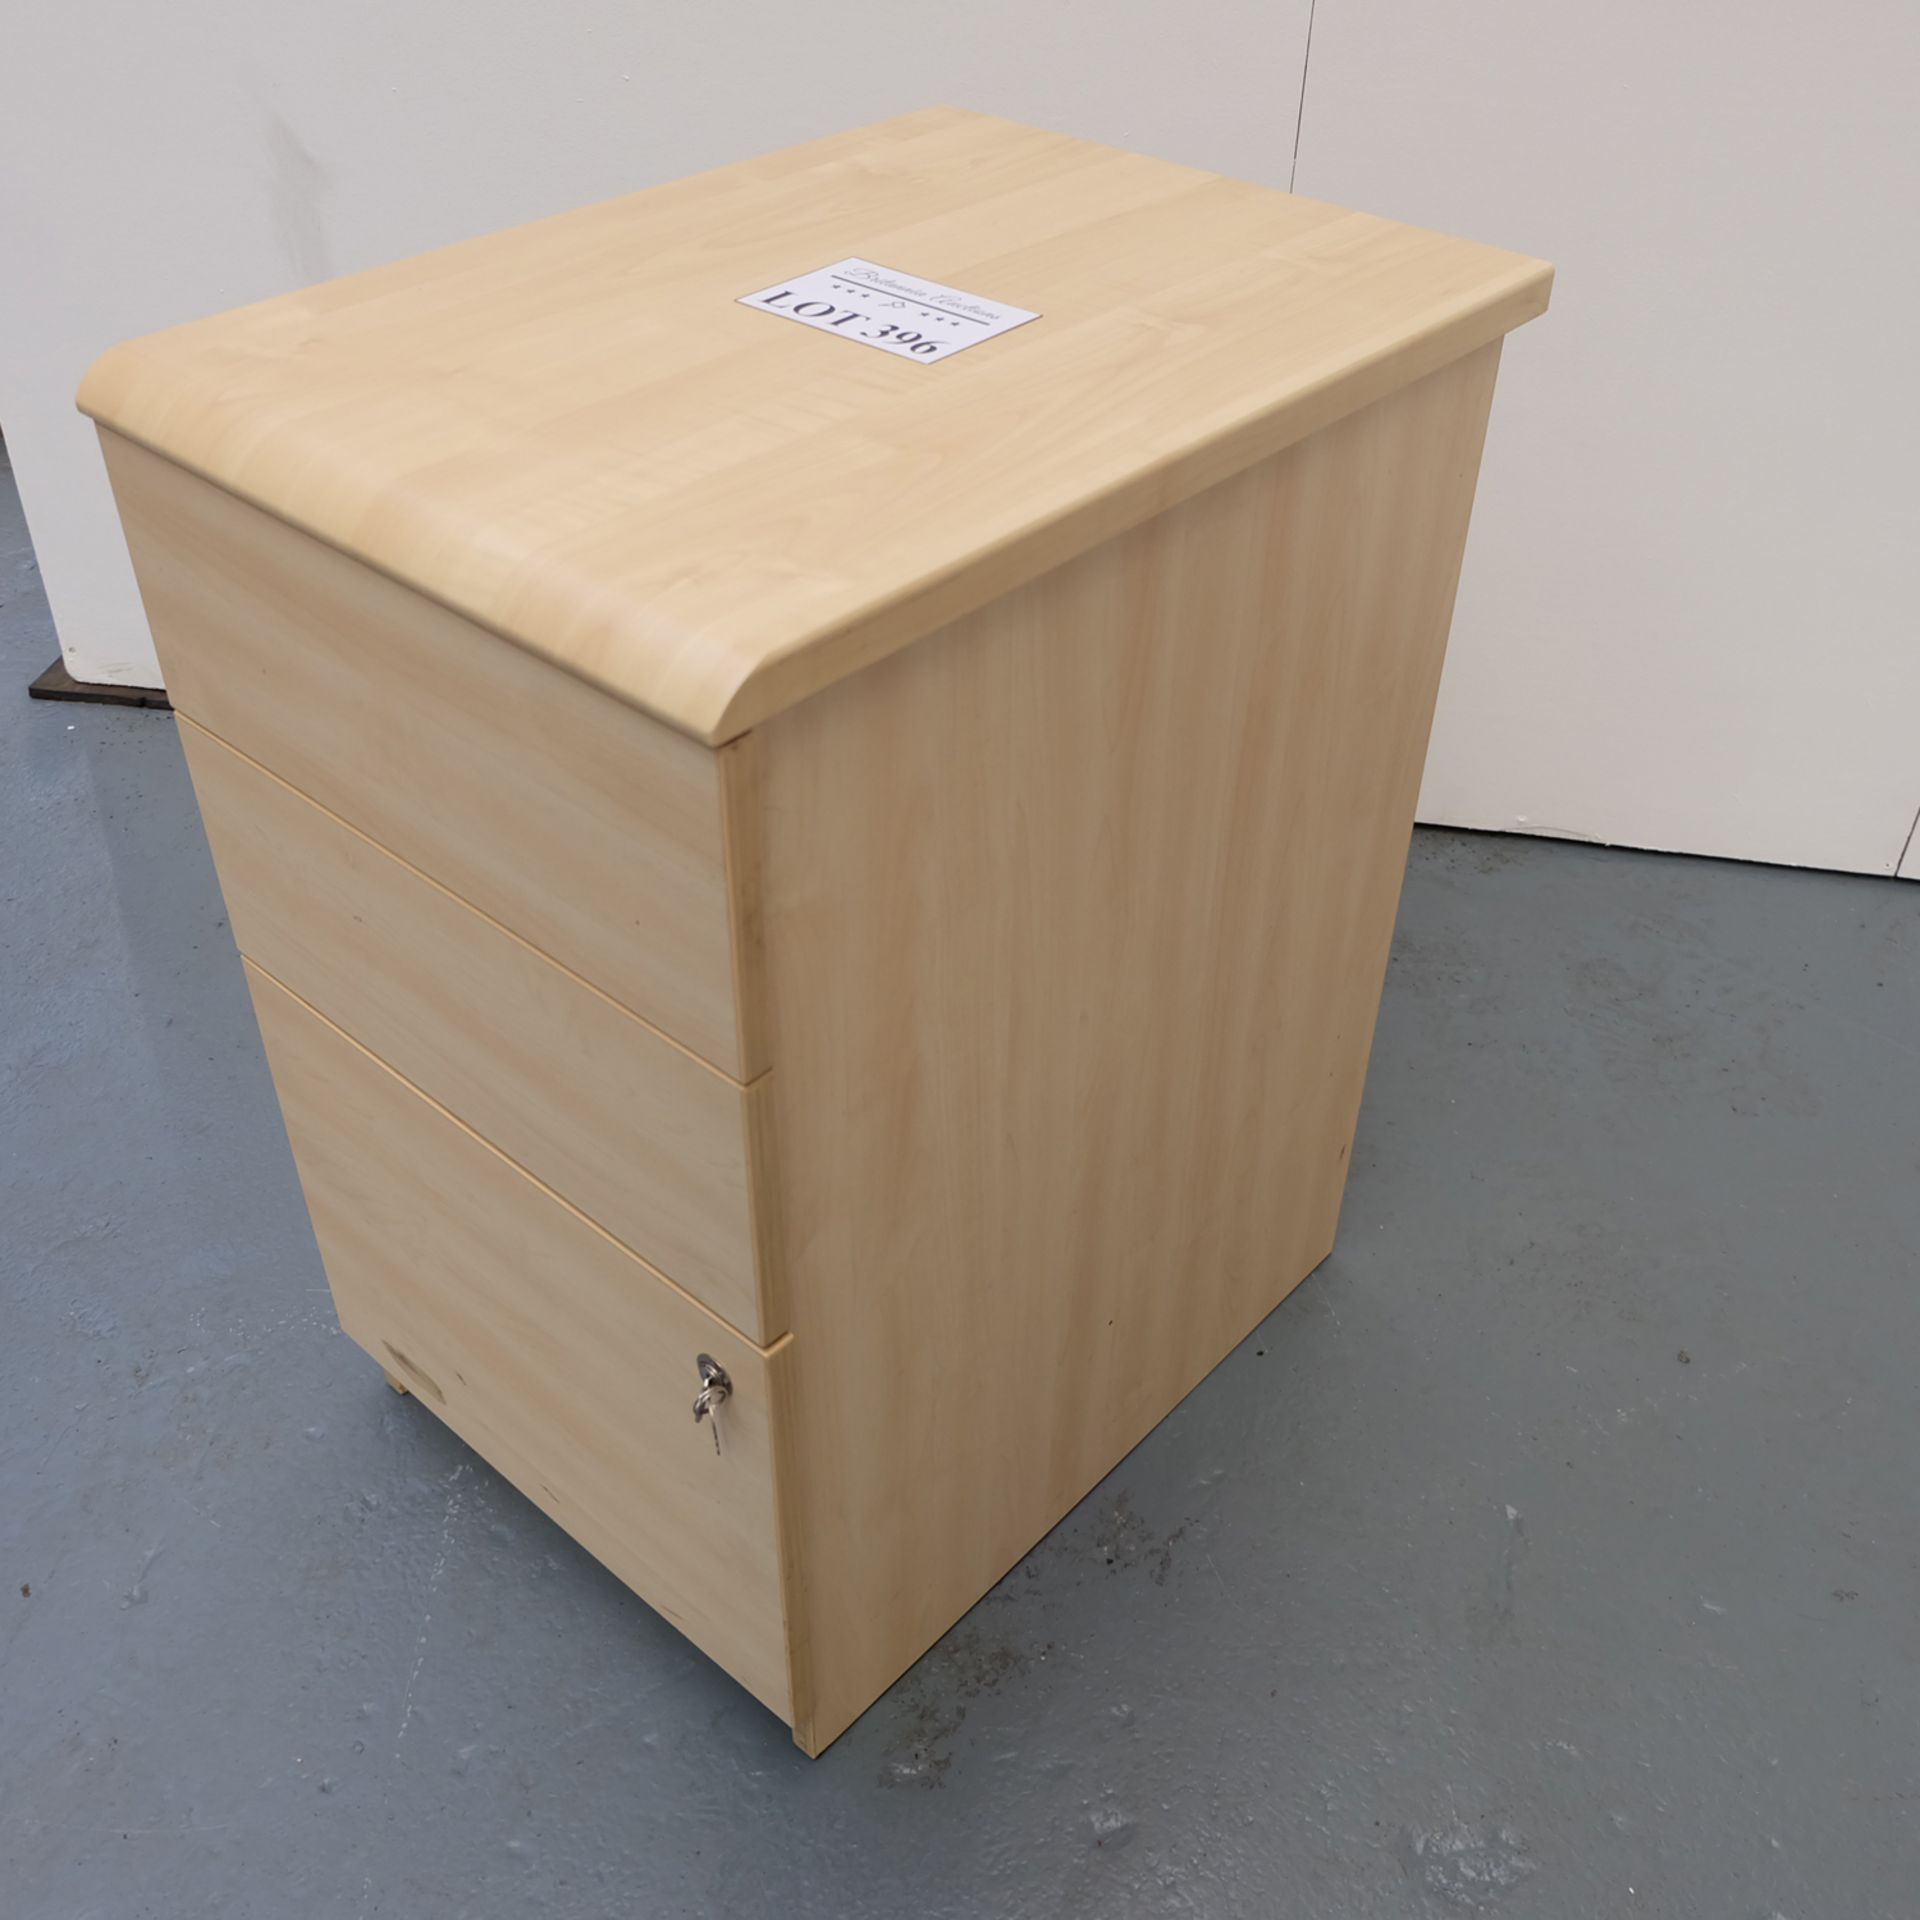 Set of Office Drawers. Dimensions 430mm x 600mm x 730mm High Approx. - Image 3 of 6